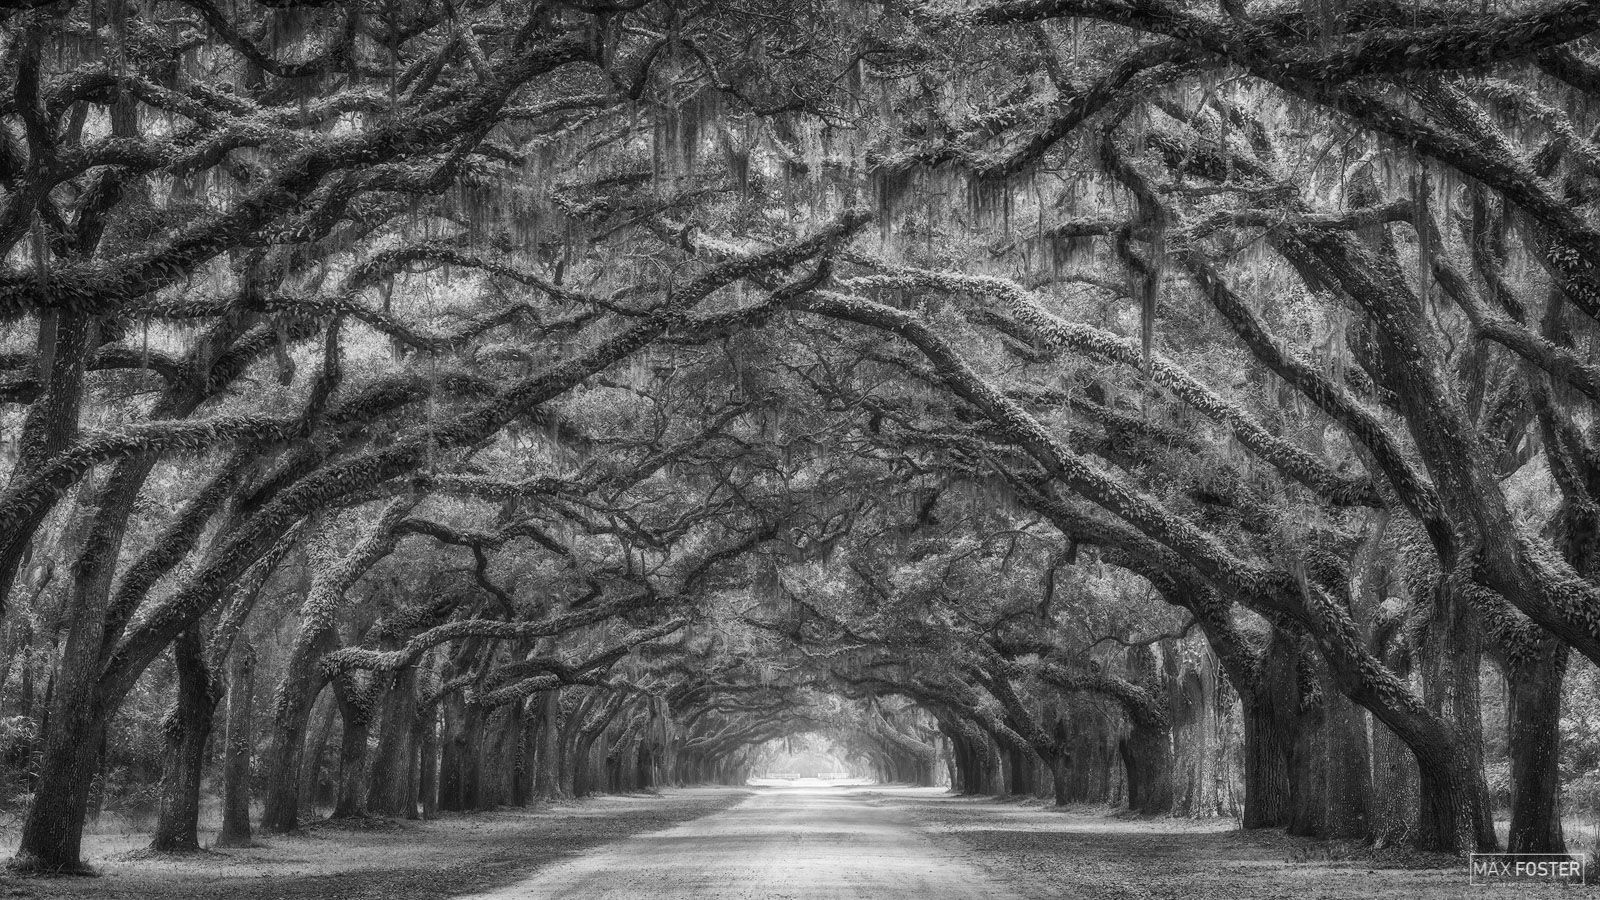 Bring nature into your home with Tunnel Vision Monochrome, Max Foster's limited edition photography print of the famous oak tree...